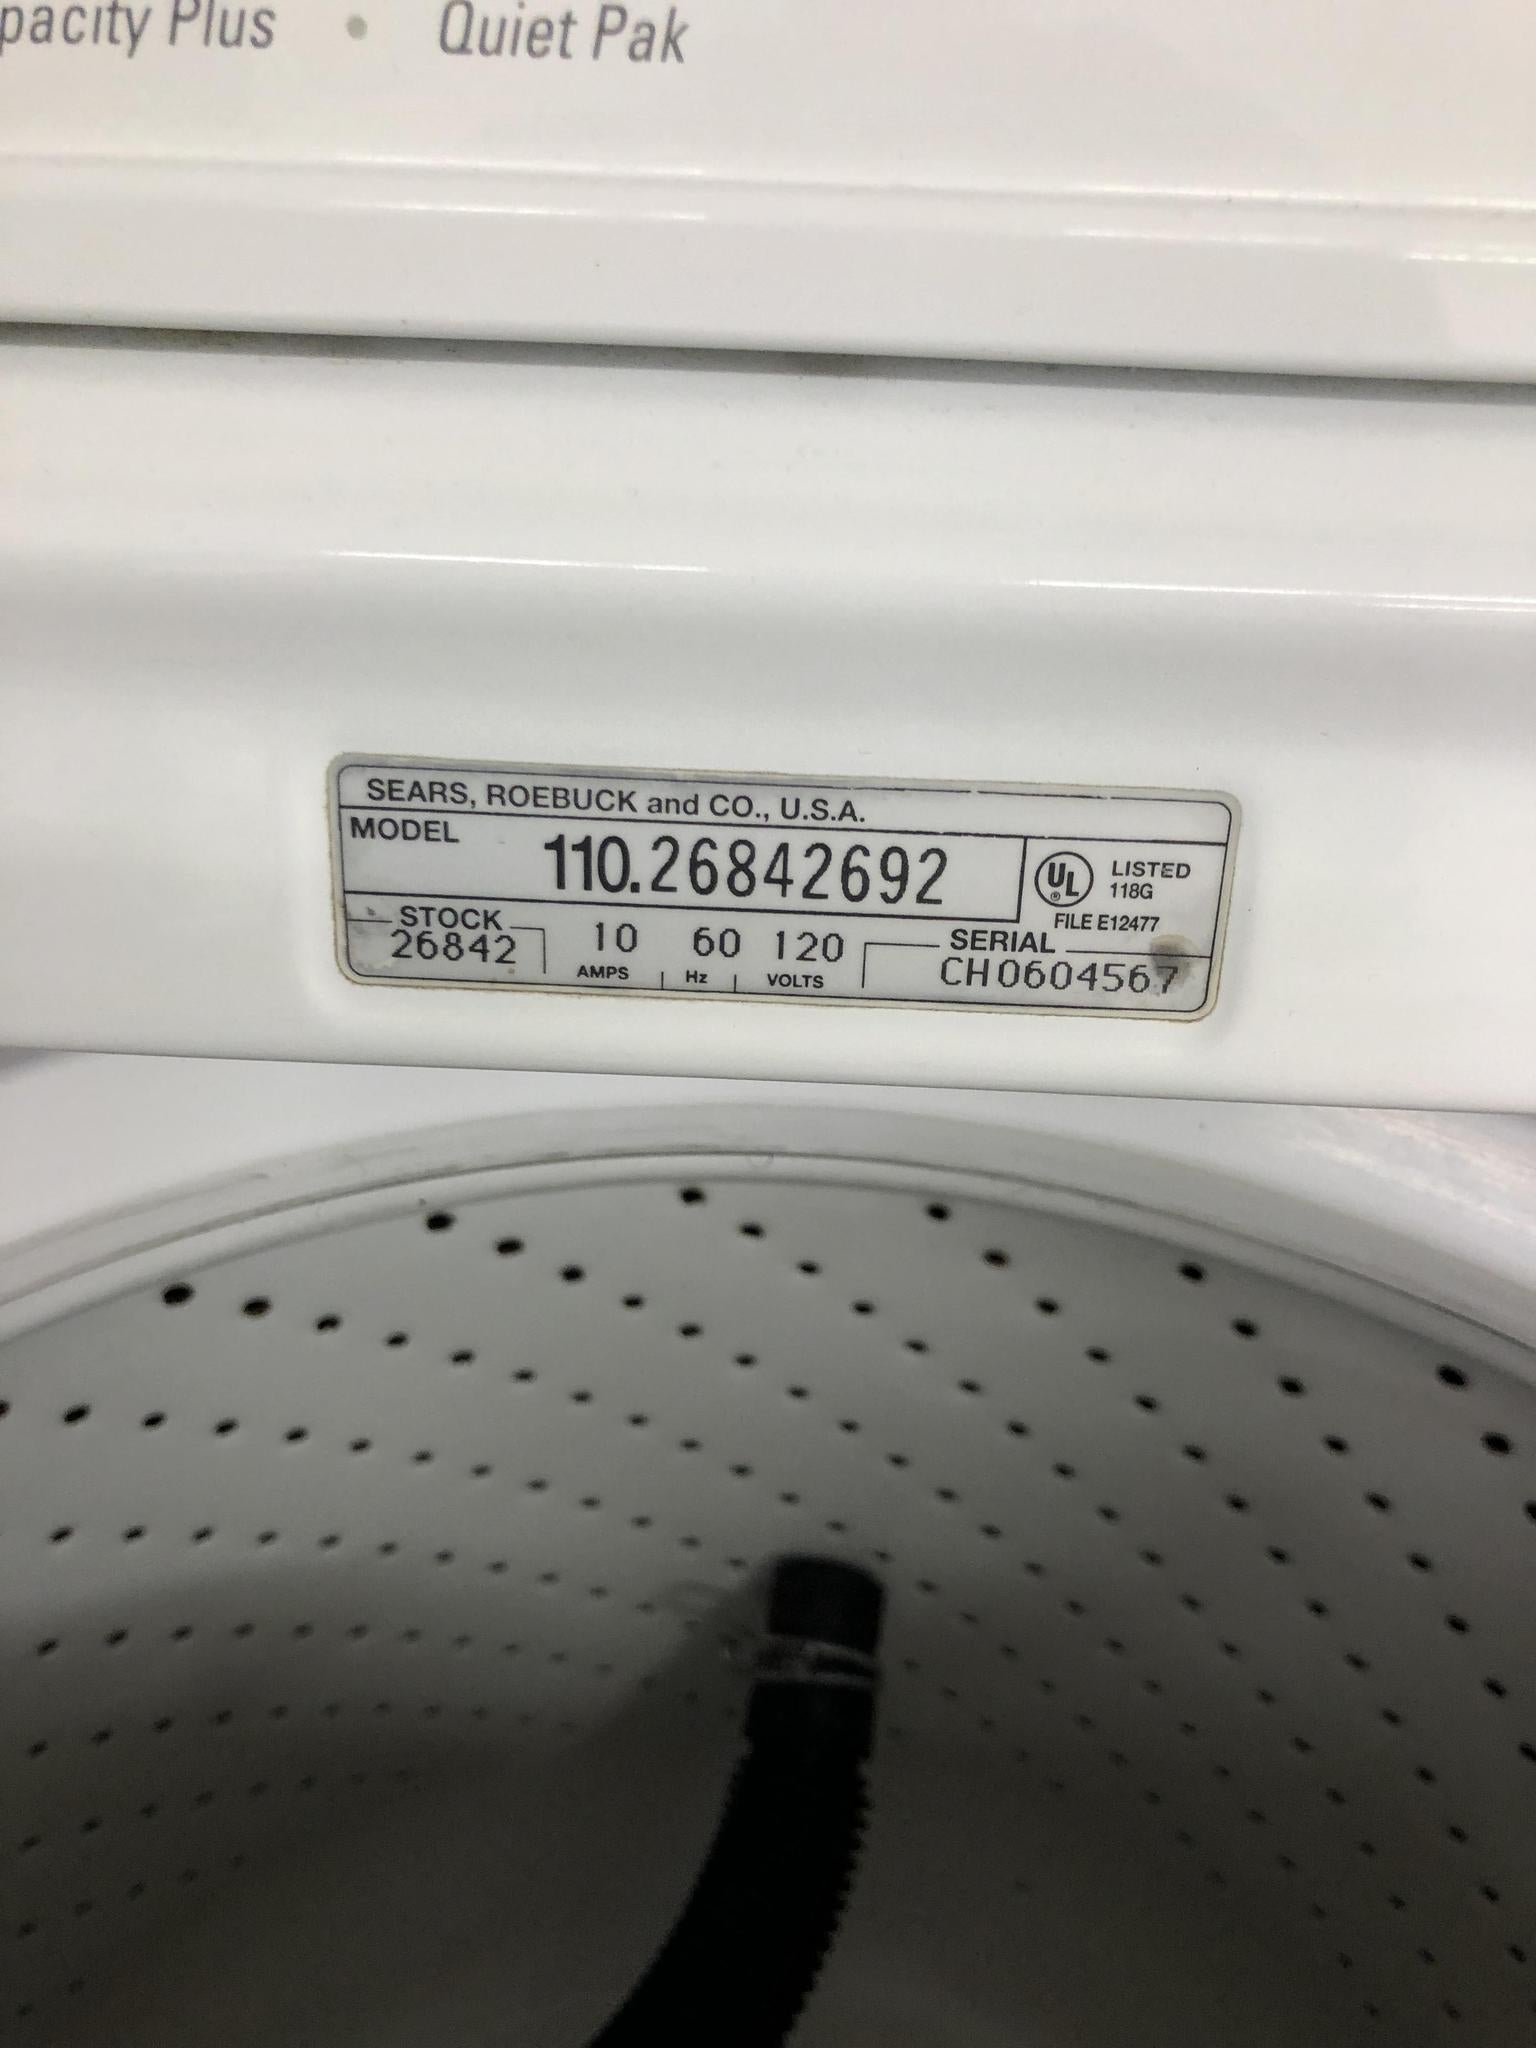 Kenmore Washer - 7131 – Shorties Appliances And More, LLC